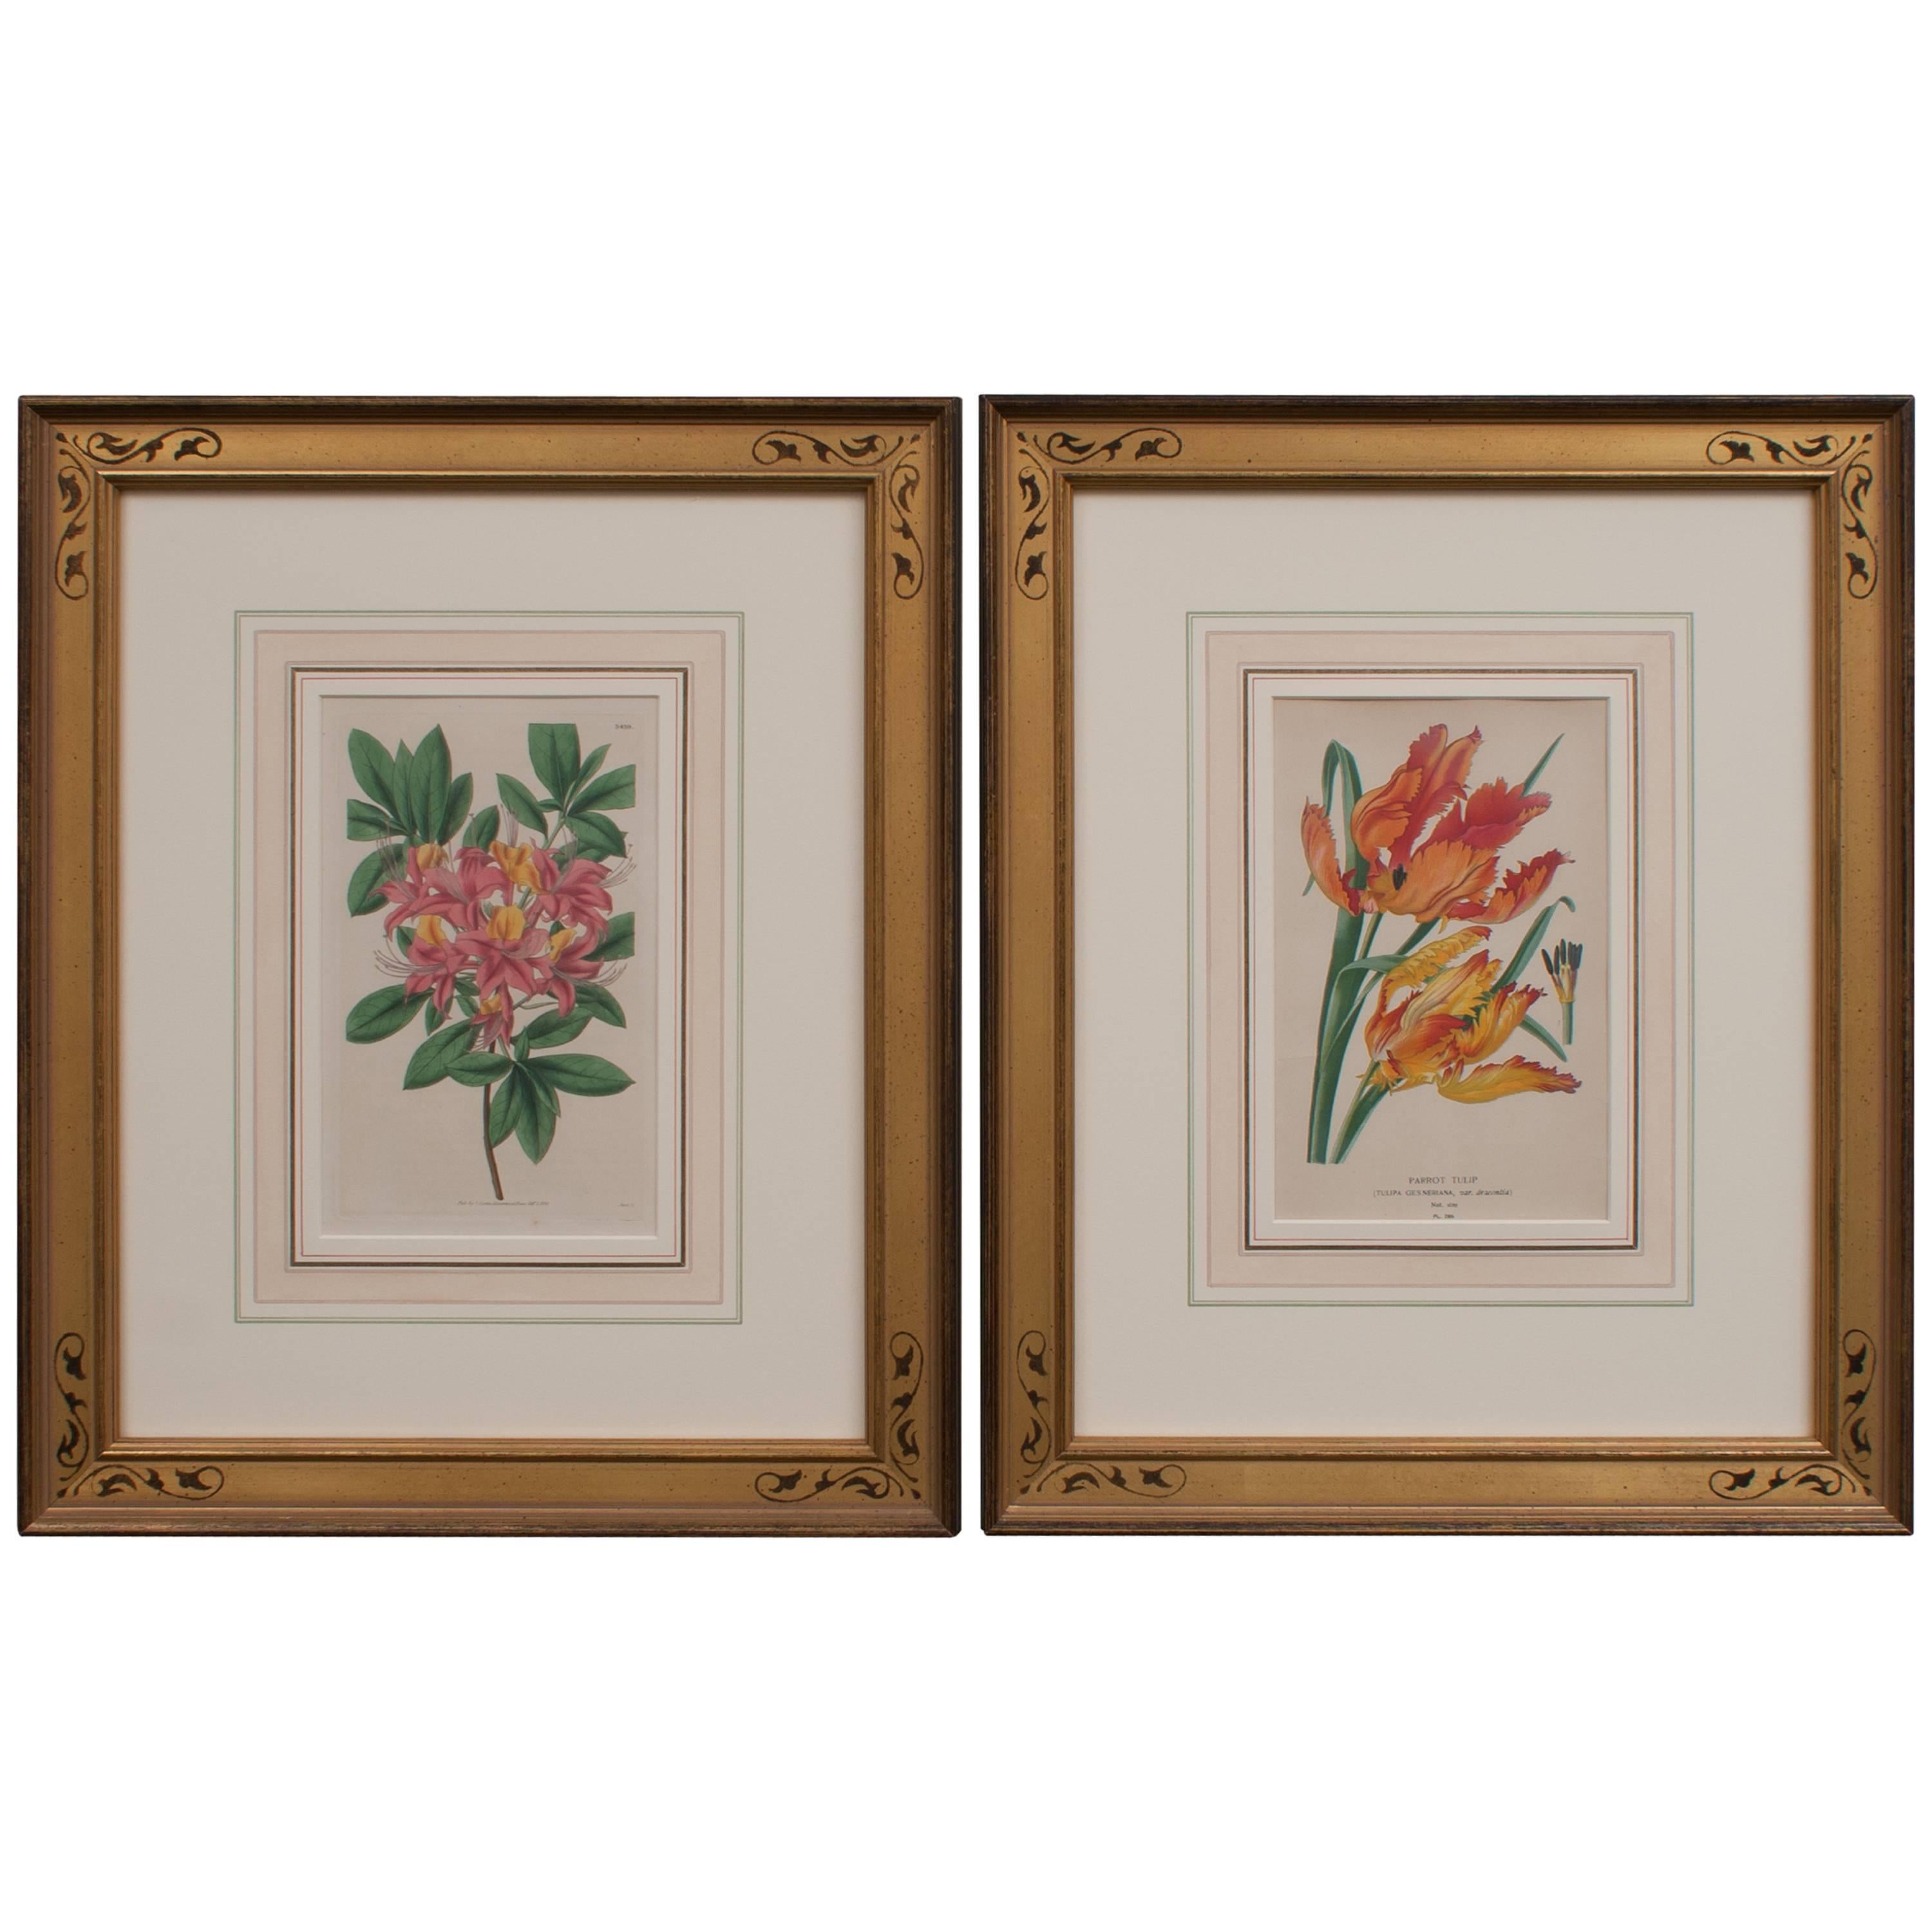 Pair of Hand-Colored Floral Engravings For Sale